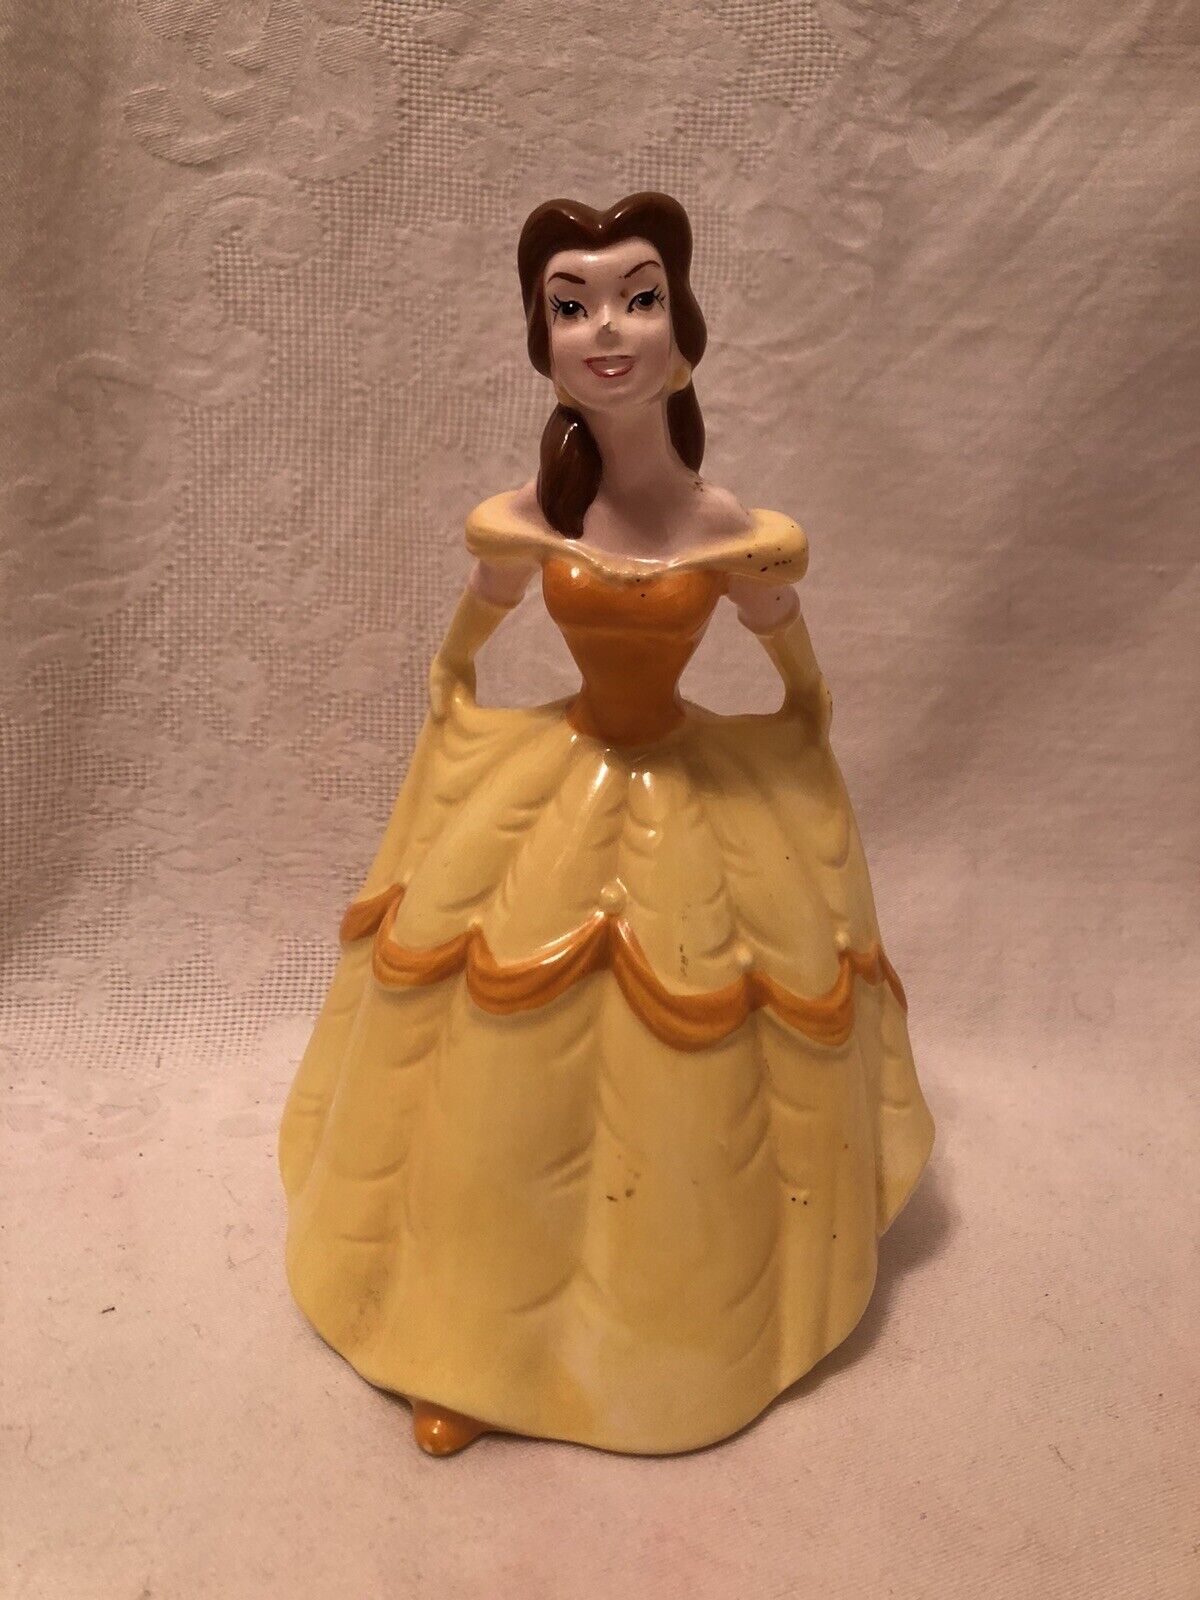 Vintage Disney Beauty And The Beast Belle Porcelain Figurine 6 in Preowned